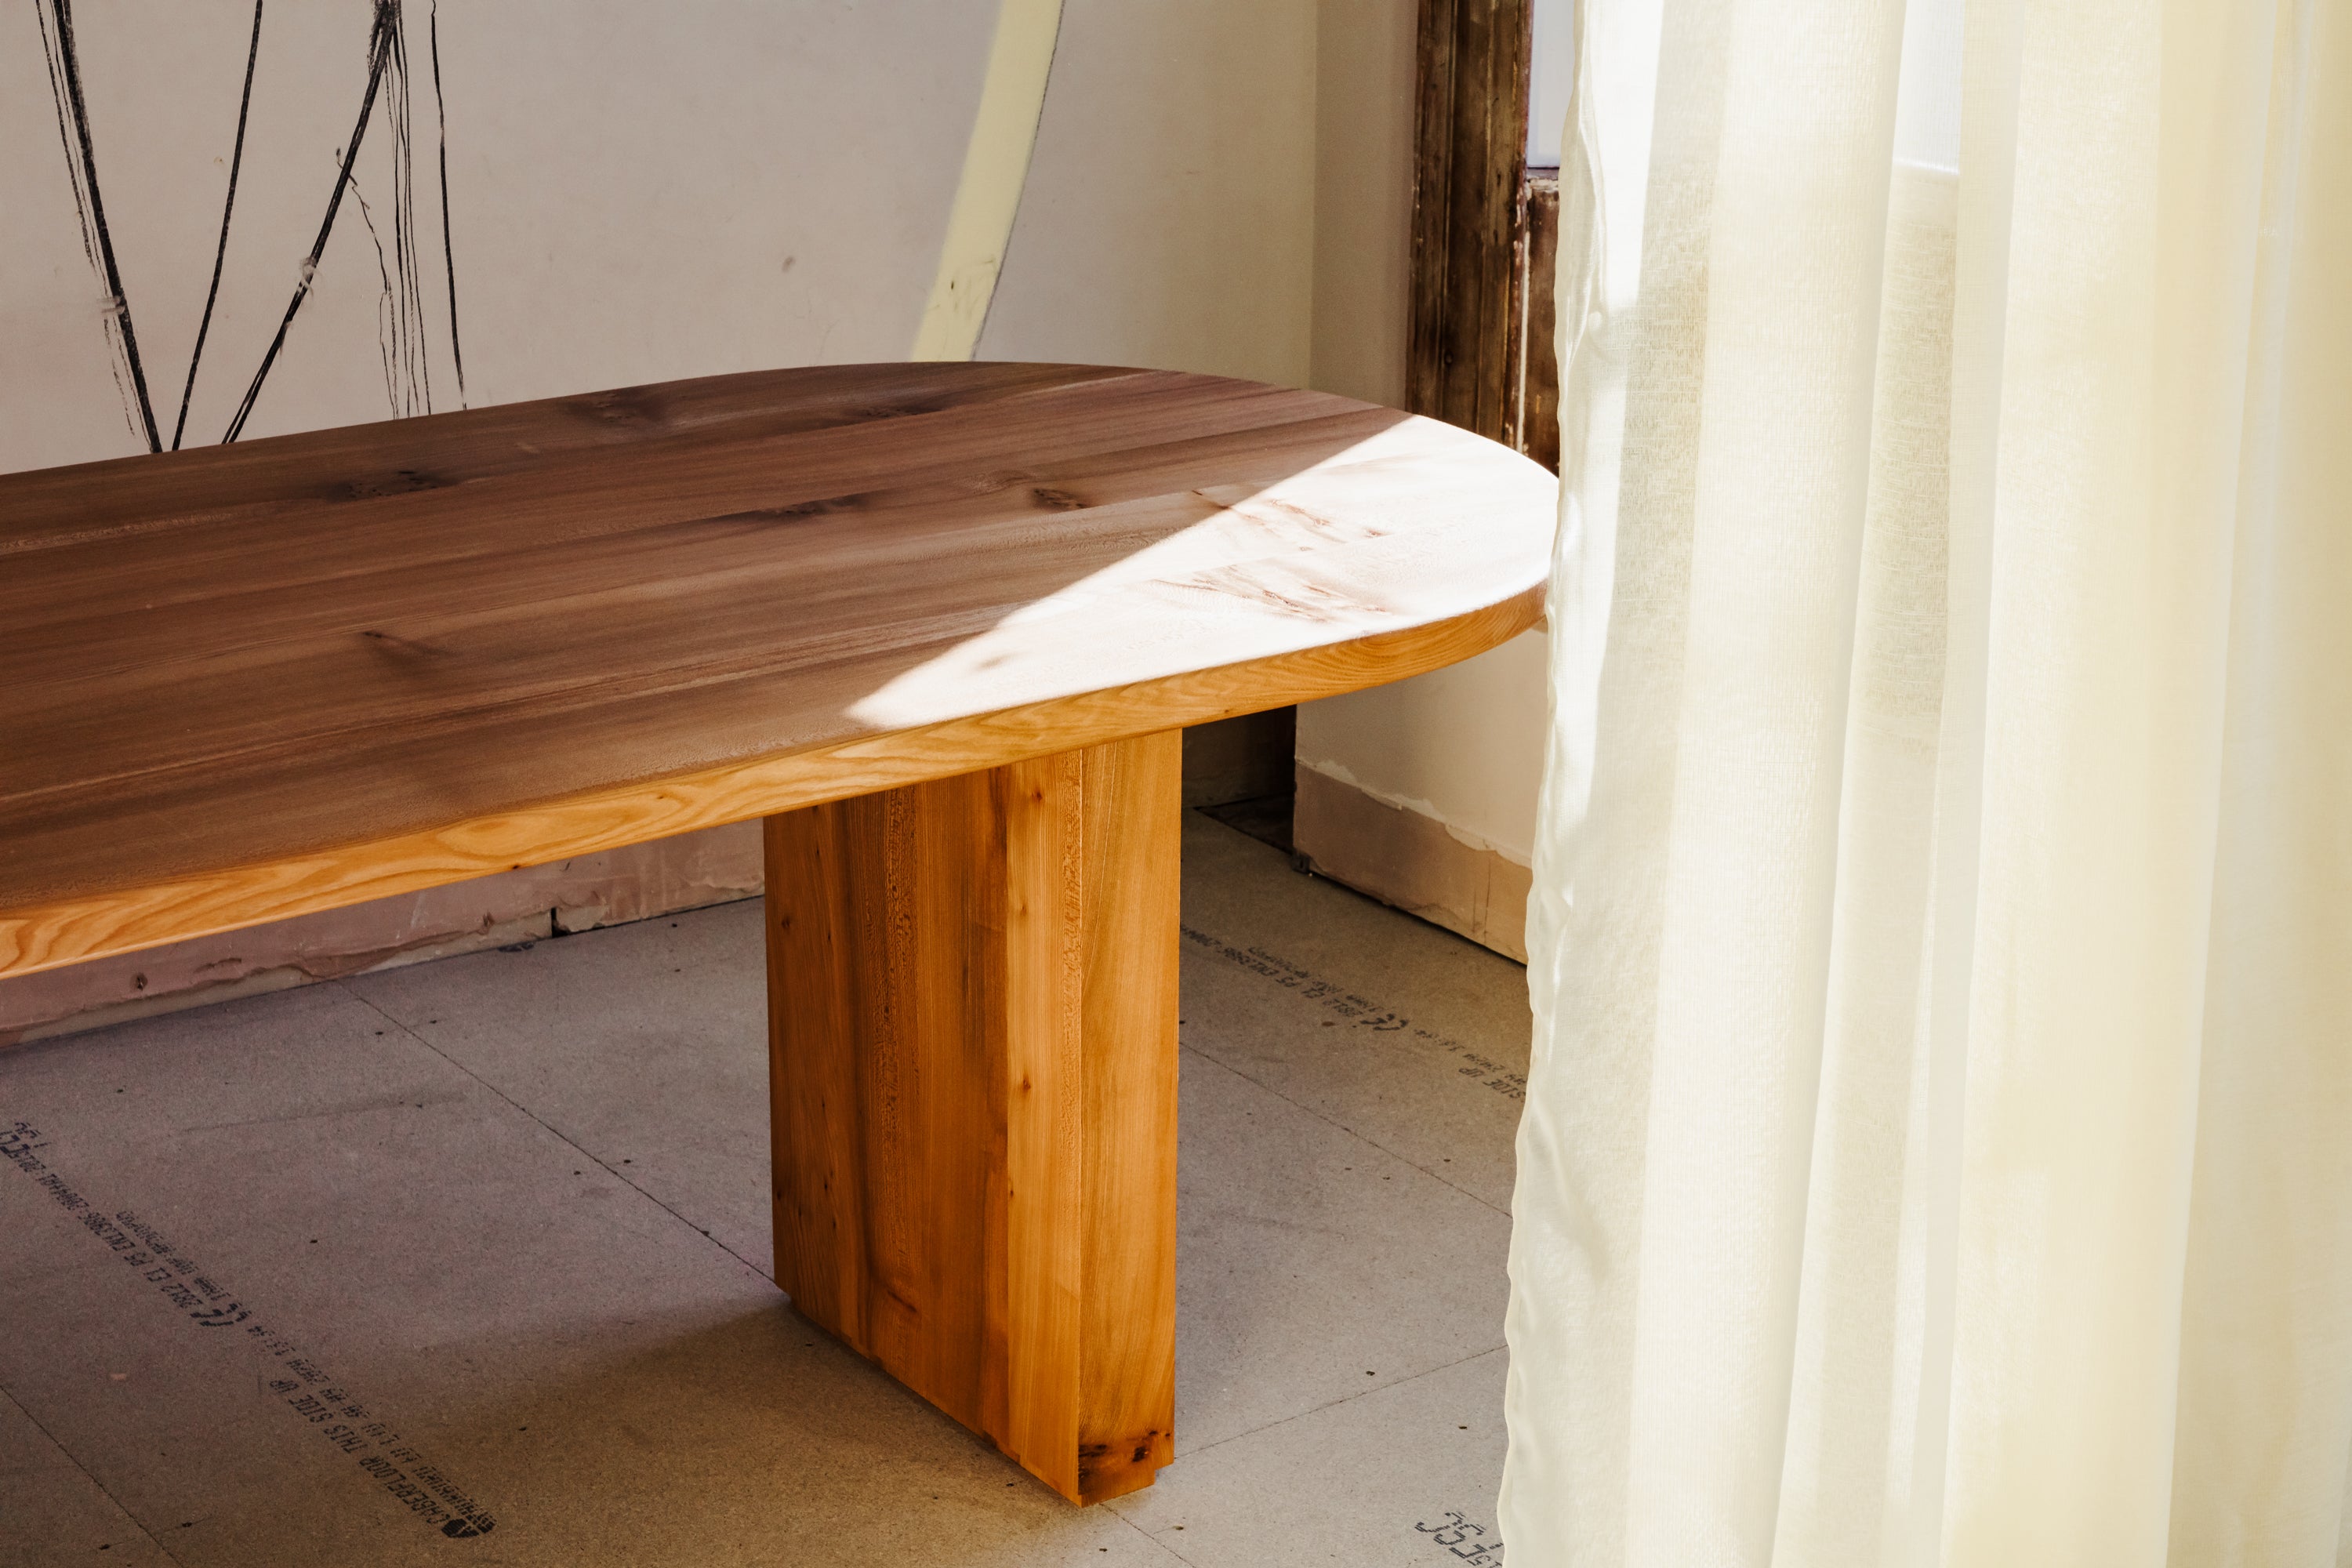 Soft Curves and the rich natural tones of English Elm